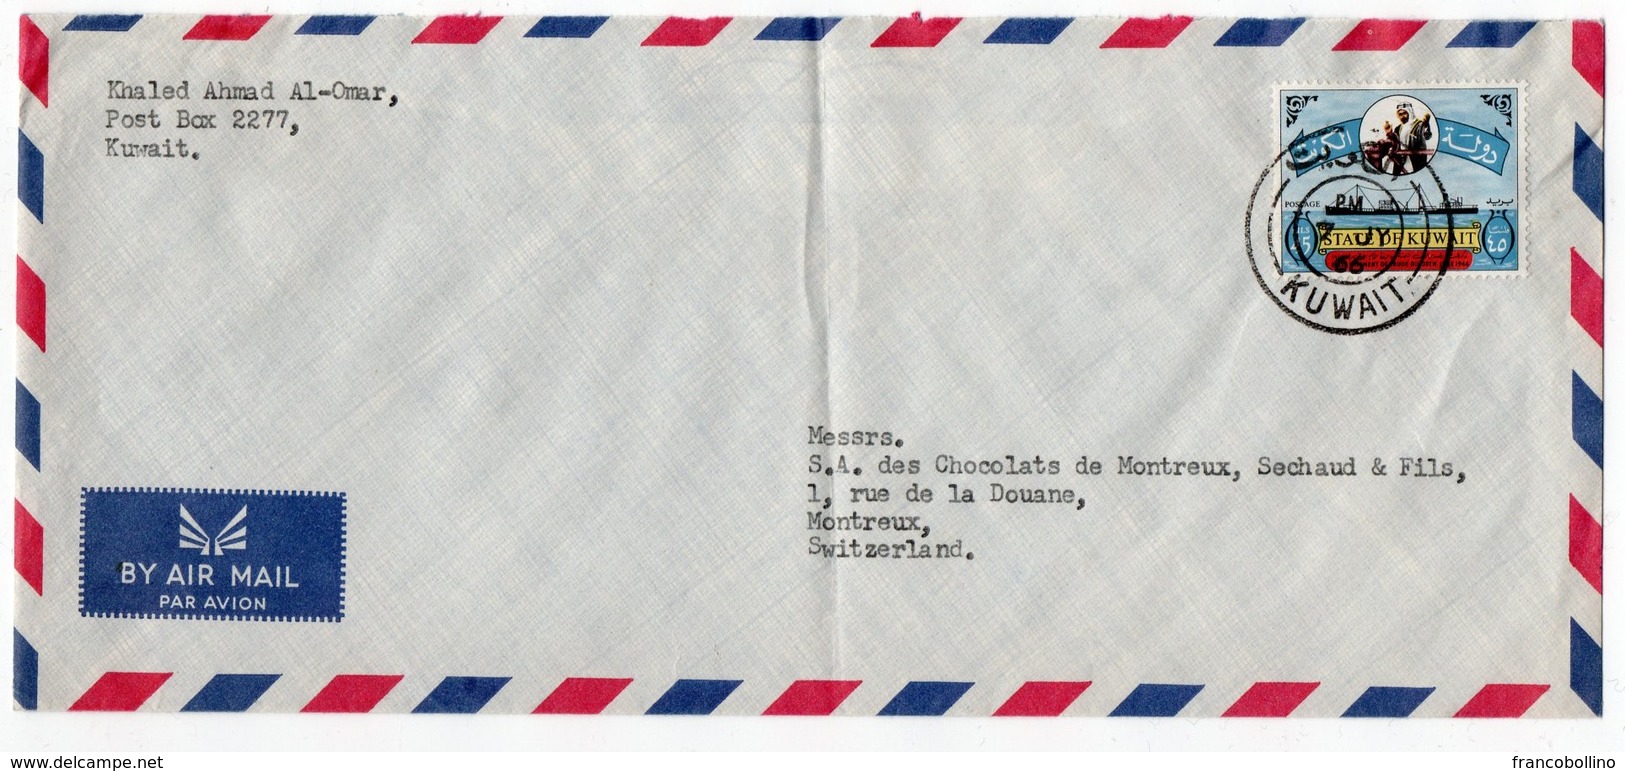 KUWAIT - AIR MAIL COVER TO SWITZERLAND 1966/ THEMATIC STAMP-CRUDE OIL/ SHIP / PETROL - Kuwait